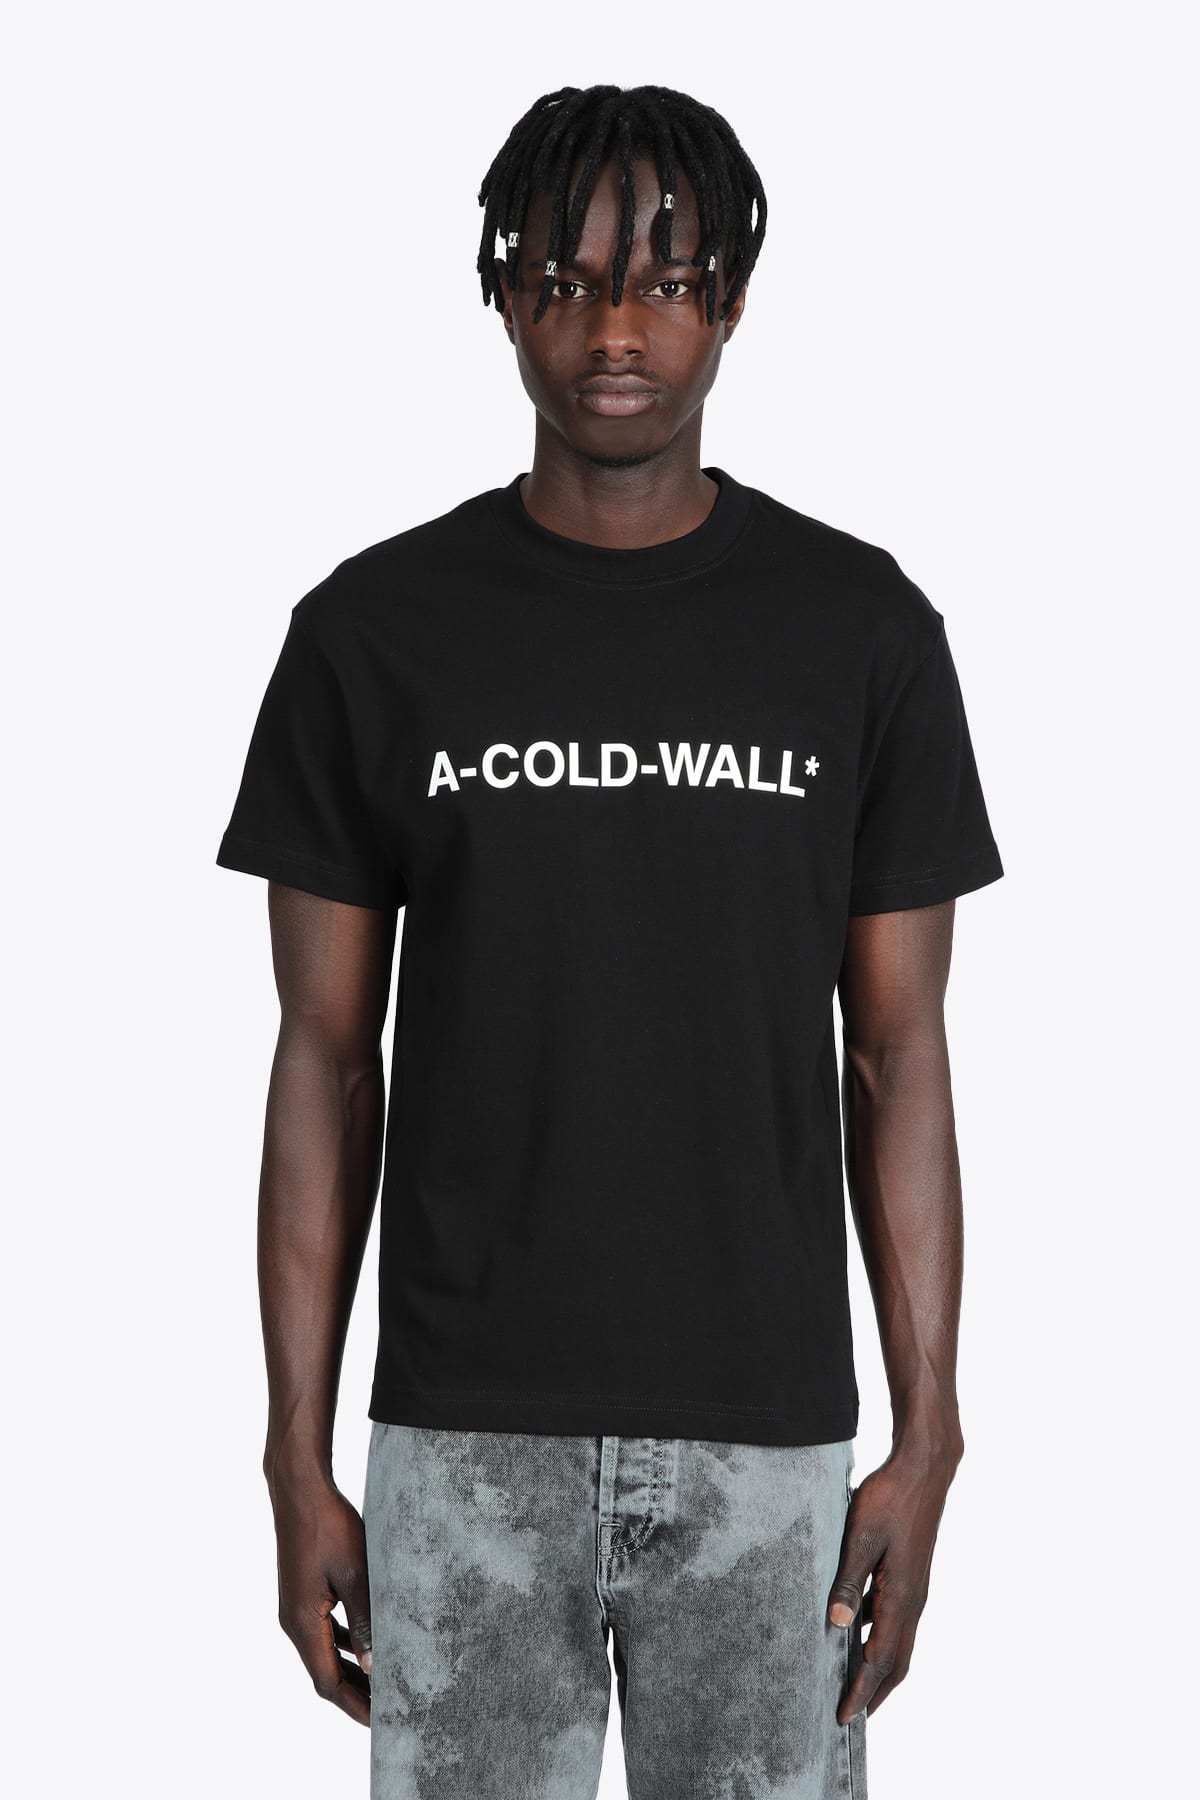 A-COLD-WALL Knitted Esssential Ss Logo T-shirt Black cotton t-shirt with front logo